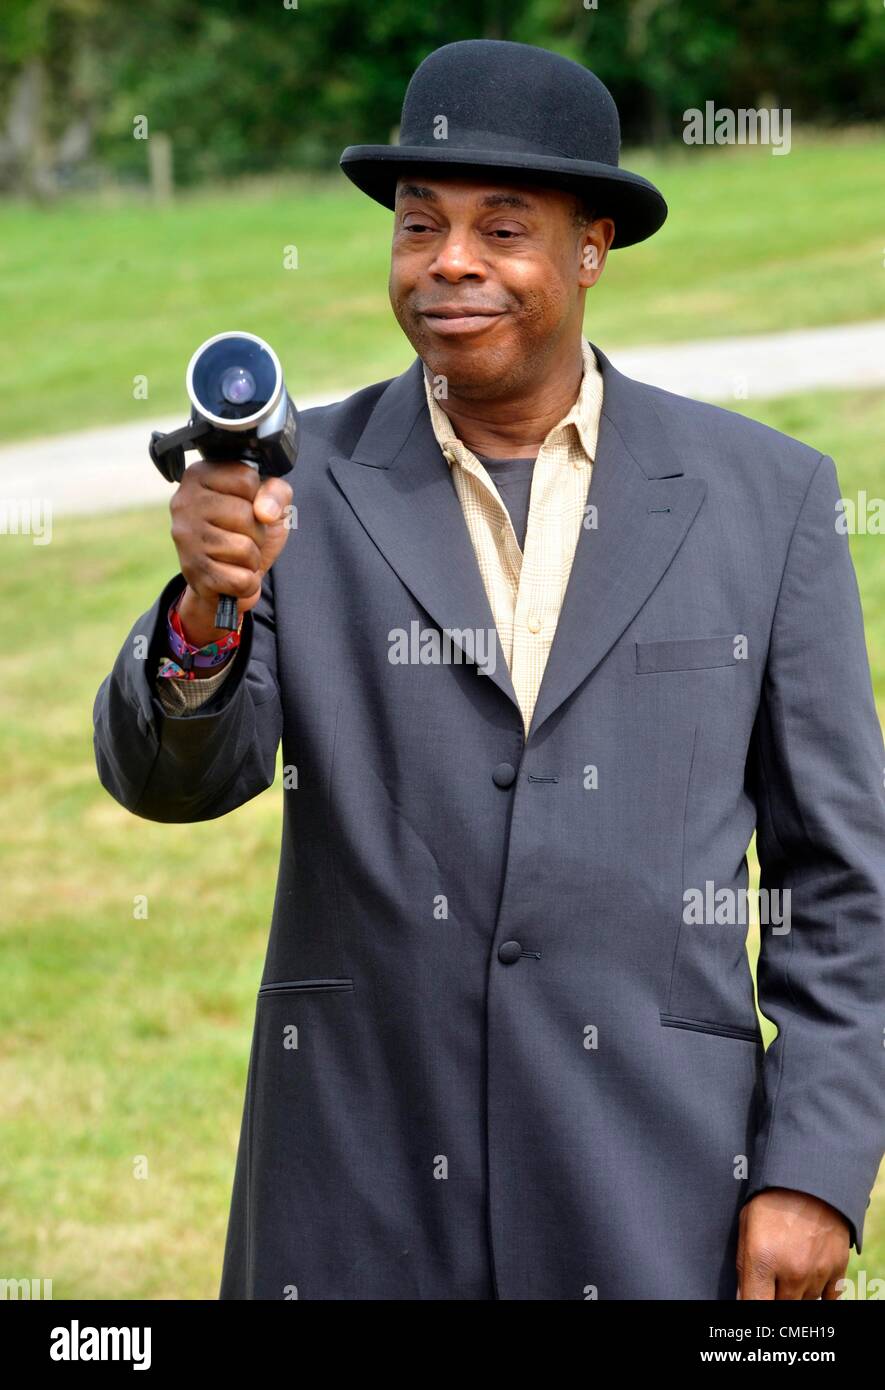 29th July 2012. Michael Winslow photocall before he went on stage at Camp Bestival Lulworth castle Dorset. Stock Photo